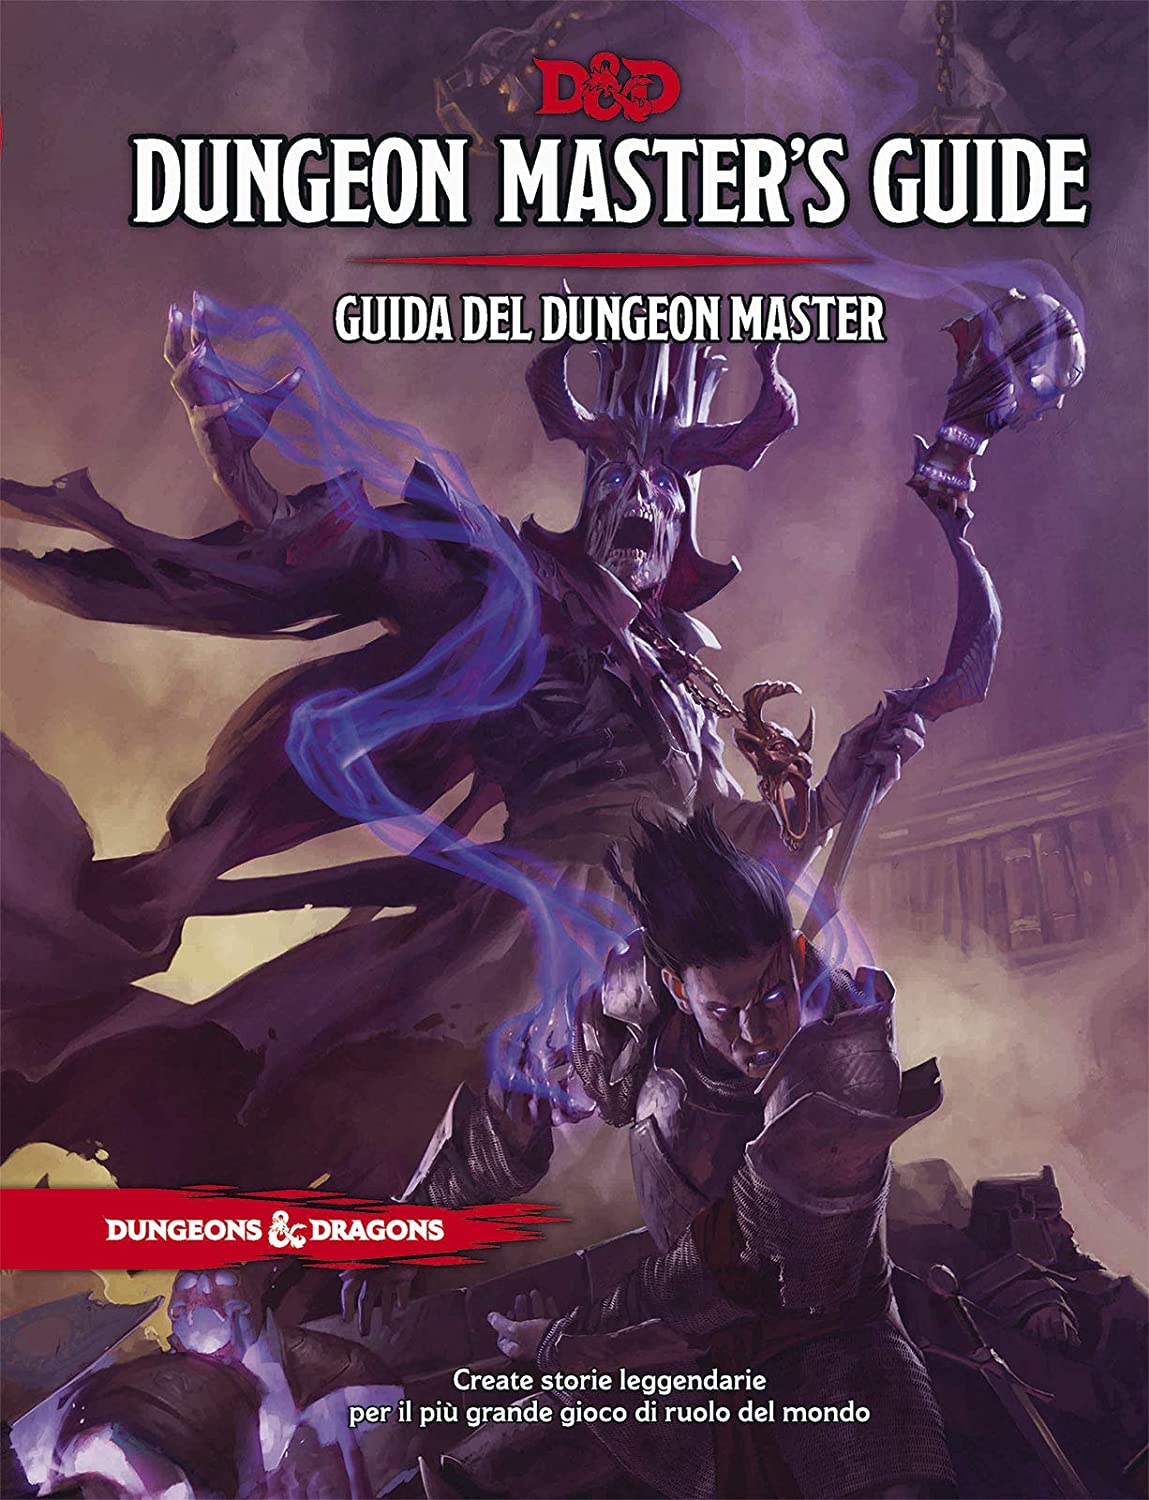 Dungeon Master's Guide (5e), Dungeons and Dragons Wiki